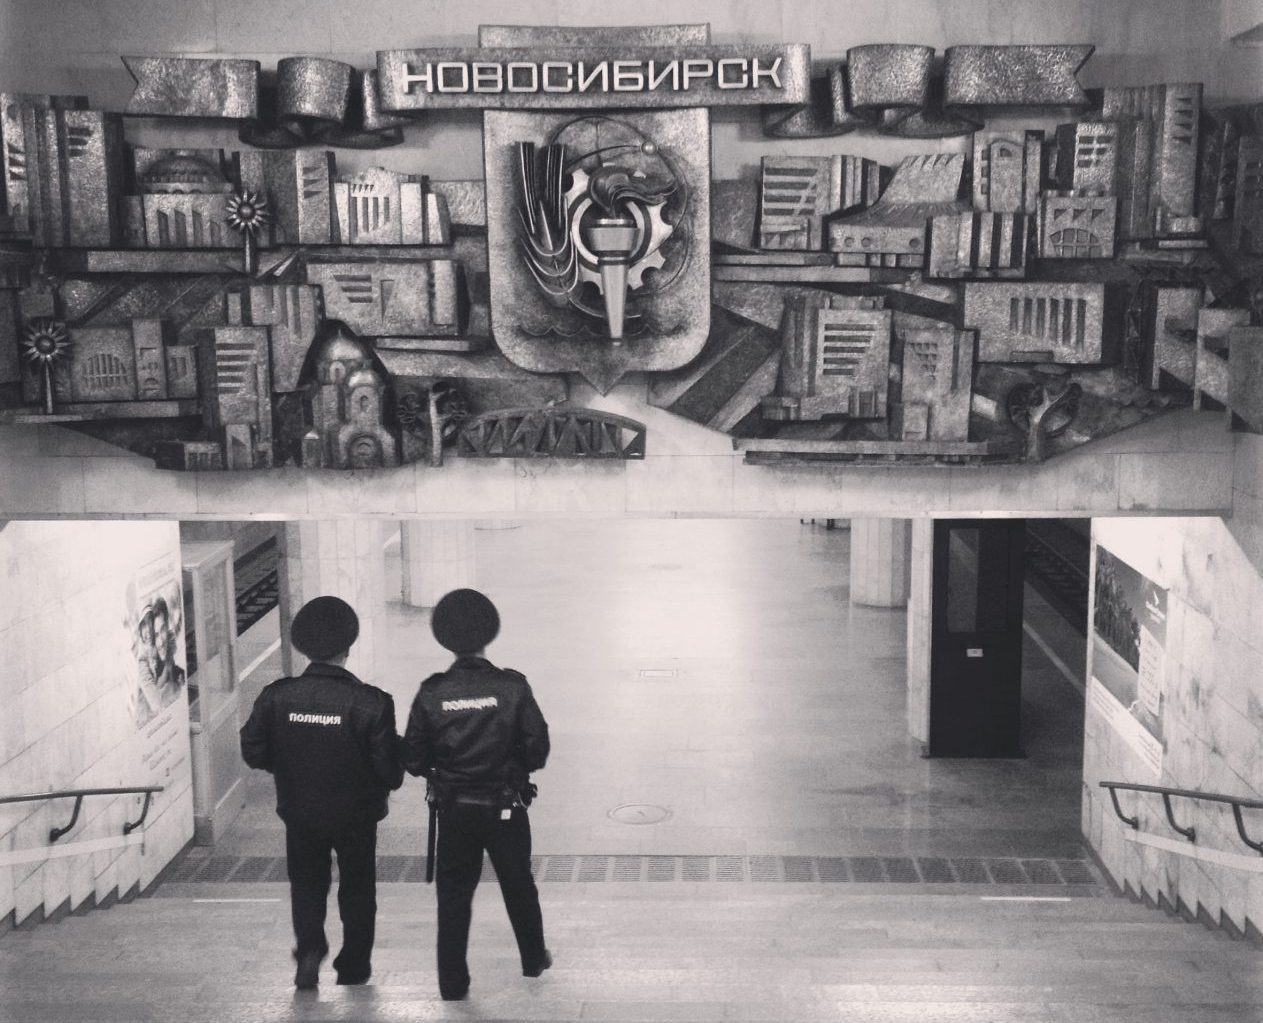 Two policemen walking in the city of Novosibirsk